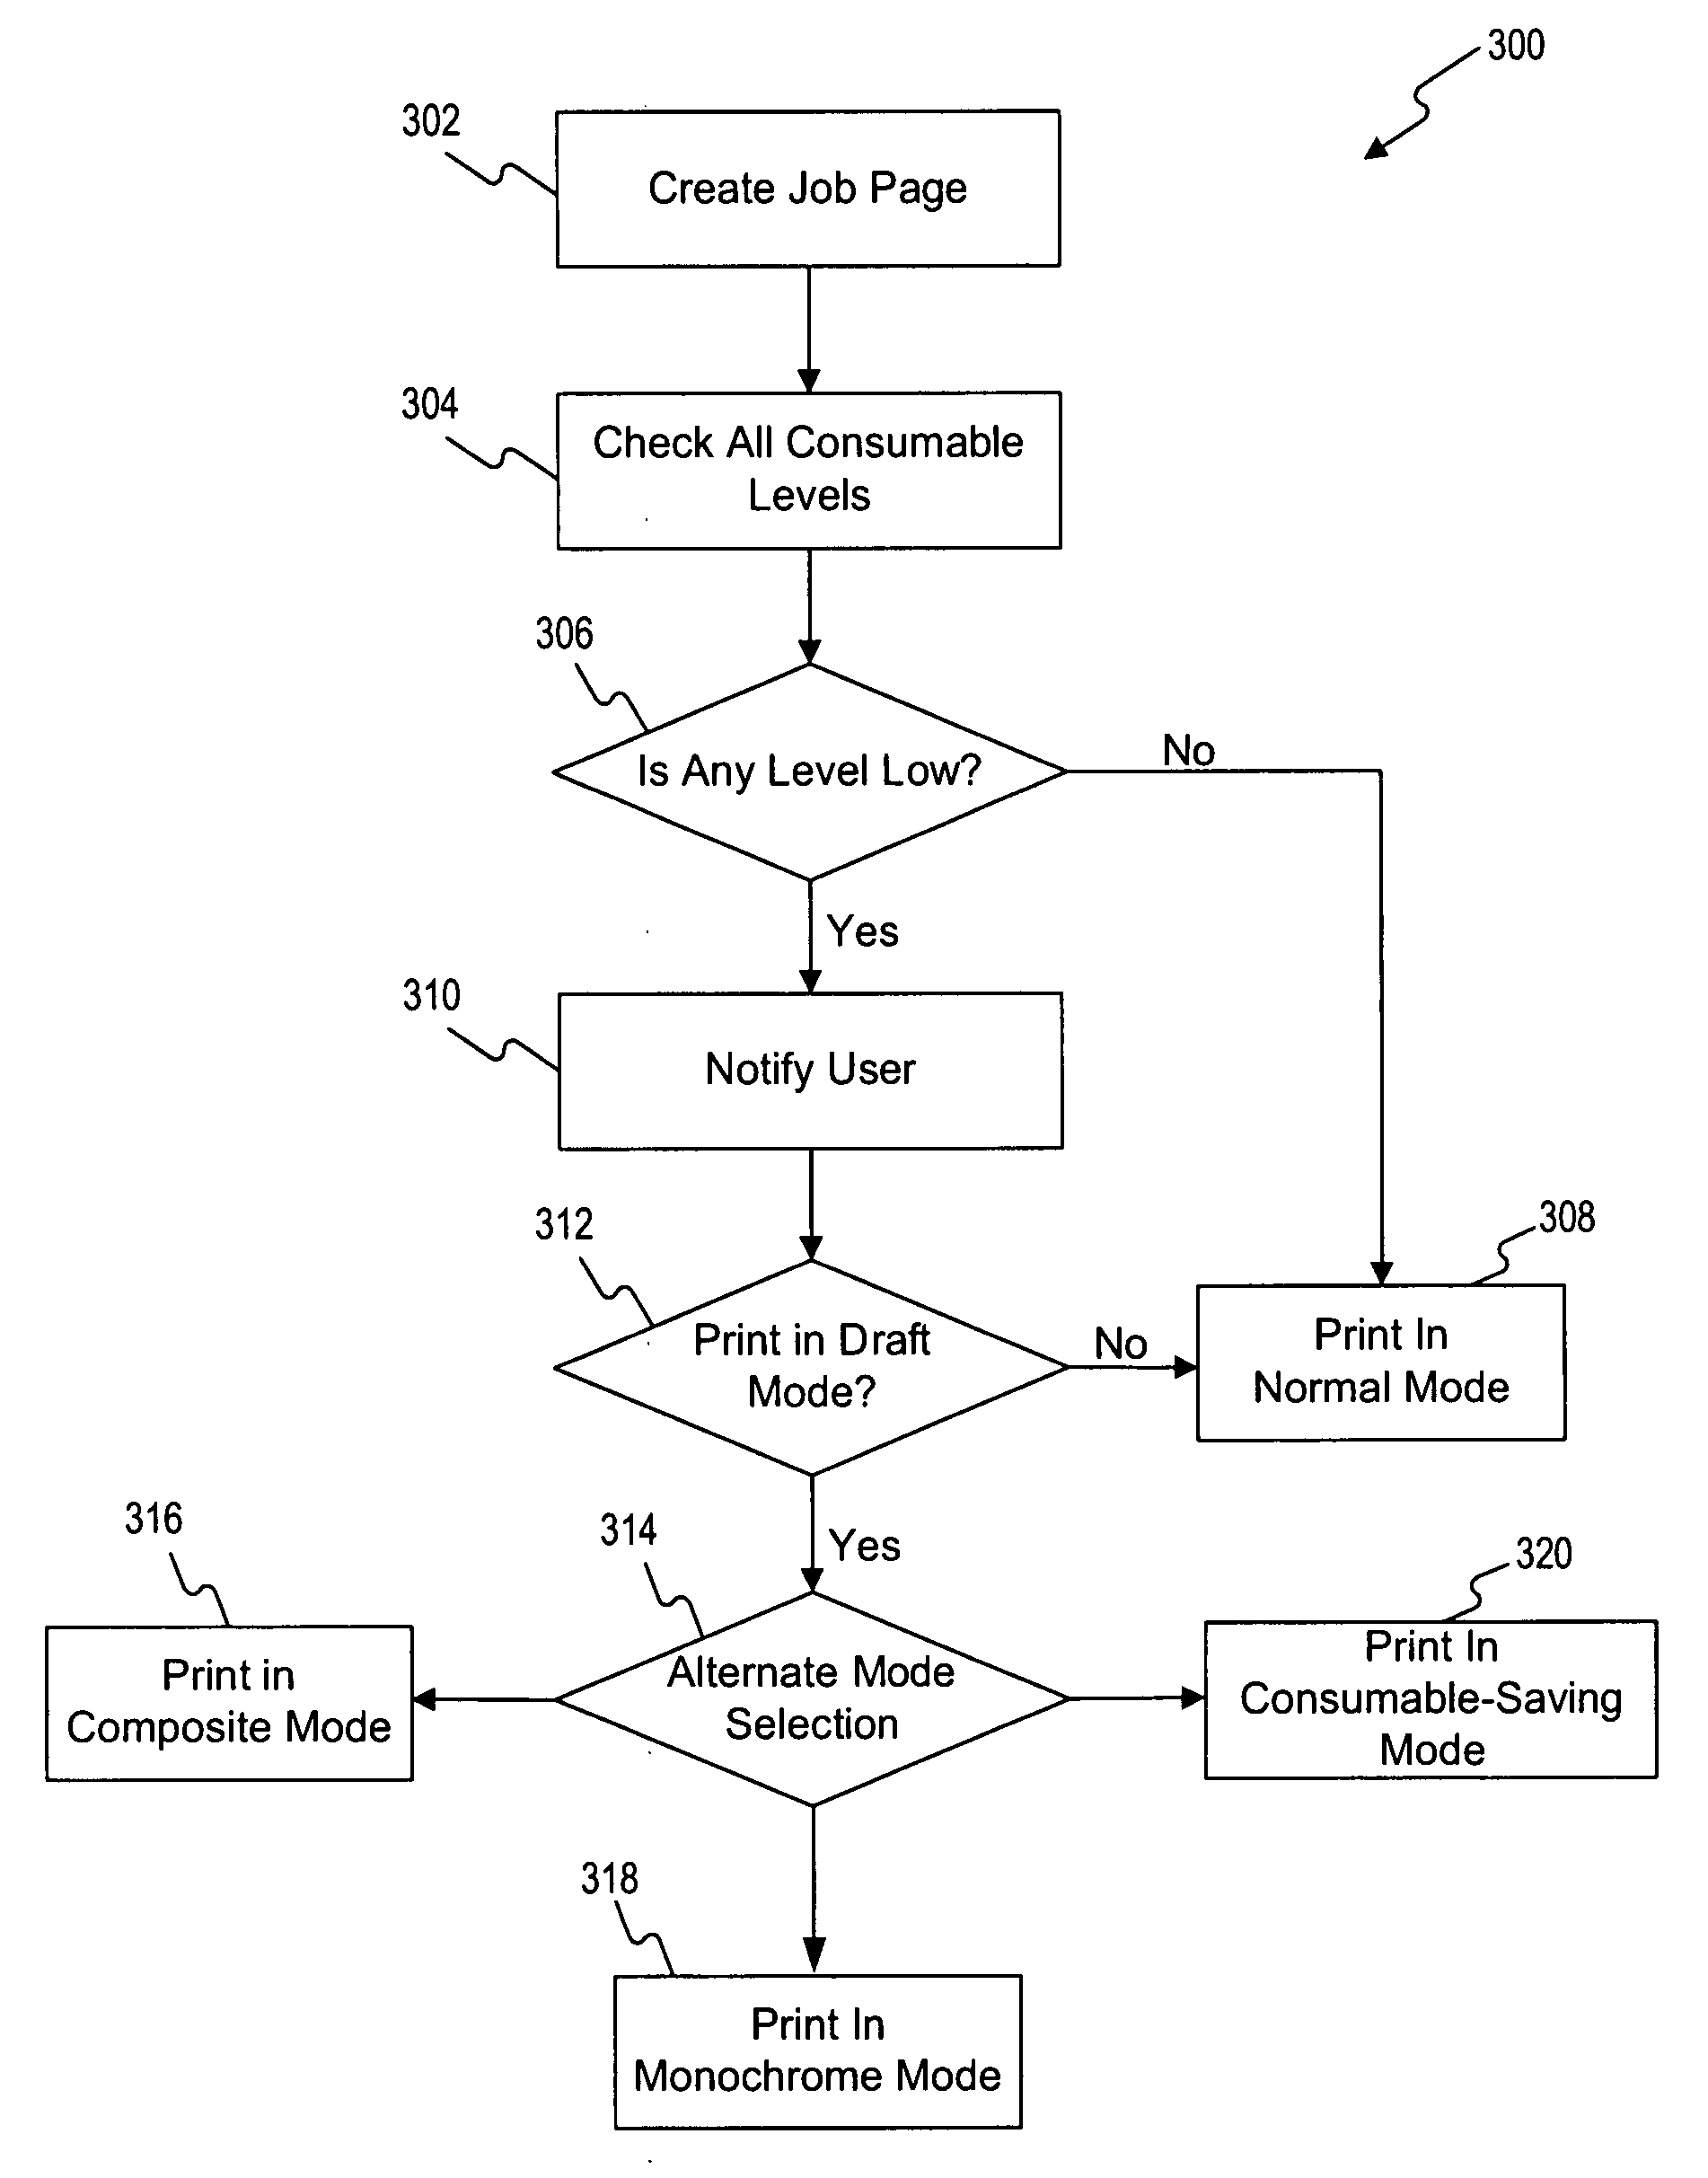 Systems and methods for extending printer availability